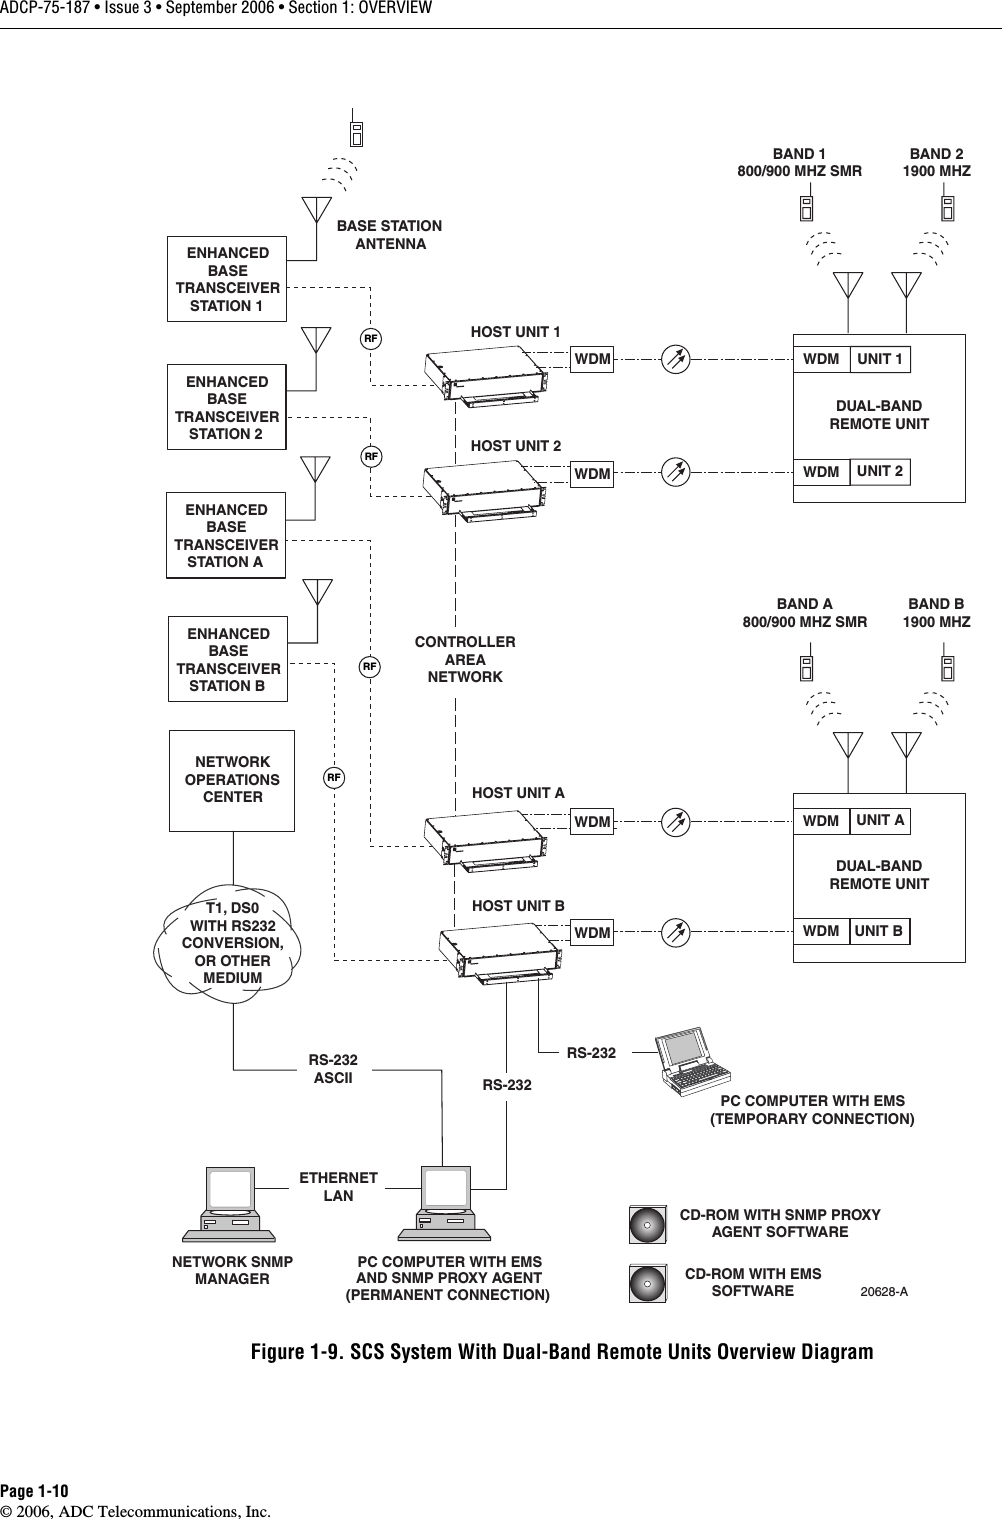 ADCP-75-187 • Issue 3 • September 2006 • Section 1: OVERVIEWPage 1-10© 2006, ADC Telecommunications, Inc.Figure 1-9. SCS System With Dual-Band Remote Units Overview DiagramPC COMPUTER WITH EMSAND SNMP PROXY AGENT(PERMANENT CONNECTION) HOST UNIT 1HOST UNIT 2HOST UNIT AHOST UNIT BNETWORKOPERATIONSCENTERPC COMPUTER WITH EMS(TEMPORARY CONNECTION)T1, DS0WITH RS232CONVERSION,OR OTHERMEDIUMRS-232ASCII RS-23220628-ACD-ROM WITH EMSSOFTWARERFRS-232NETWORK SNMPMANAGERCD-ROM WITH SNMP PROXYAGENT SOFTWAREETHERNETLANDUAL-BANDREMOTE UNITDUAL-BANDREMOTE UNITCONTROLLERAREANETWORKBAND 1800/900 MHZ SMRBAND A800/900 MHZ SMRBAND 21900 MHZBAND B1900 MHZBASE STATIONANTENNAENHANCEDBASETRANSCEIVERSTATION 1ENHANCEDBASETRANSCEIVERSTATION 2ENHANCEDBASETRANSCEIVERSTATION BENHANCEDBASETRANSCEIVERSTATION ARFRFRFUNIT 1UNIT 2UNIT AUNIT BWDMWDMWDMWDMWDMWDMWDMWDM